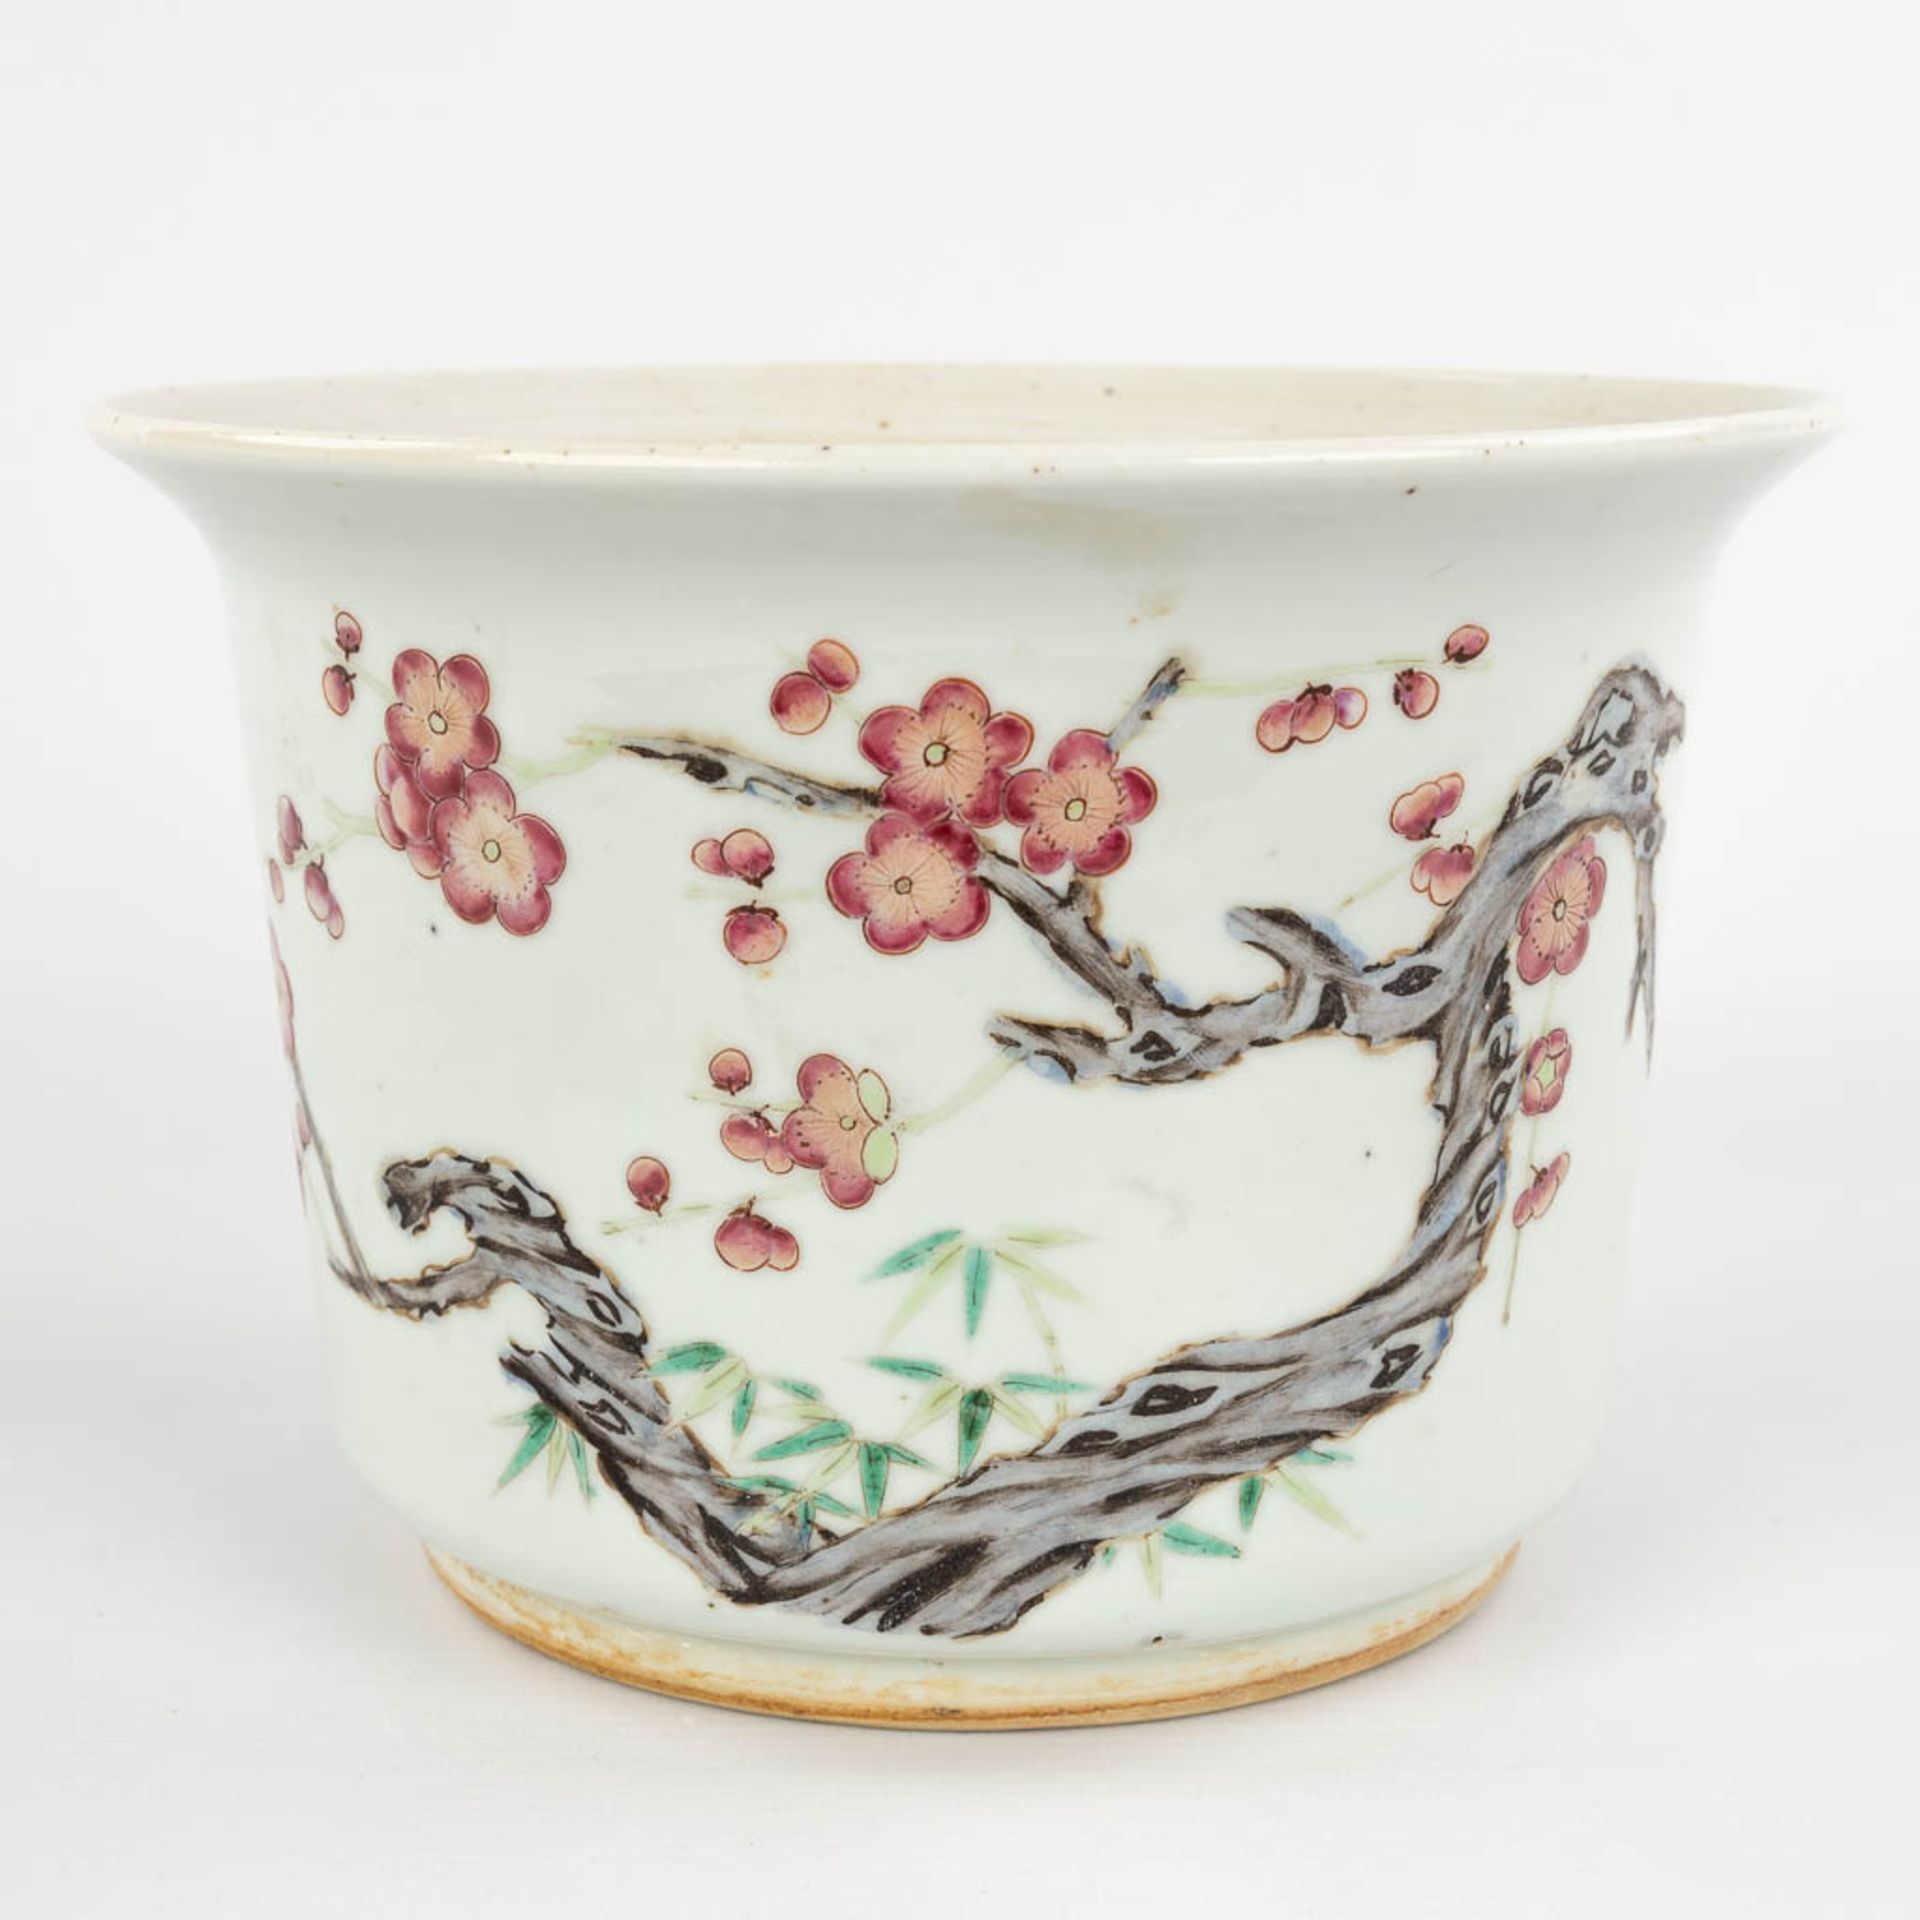 A Chinese flower pot, decorated with spring flowers, 19th/20th C. (H:15,5 x D:22 cm)